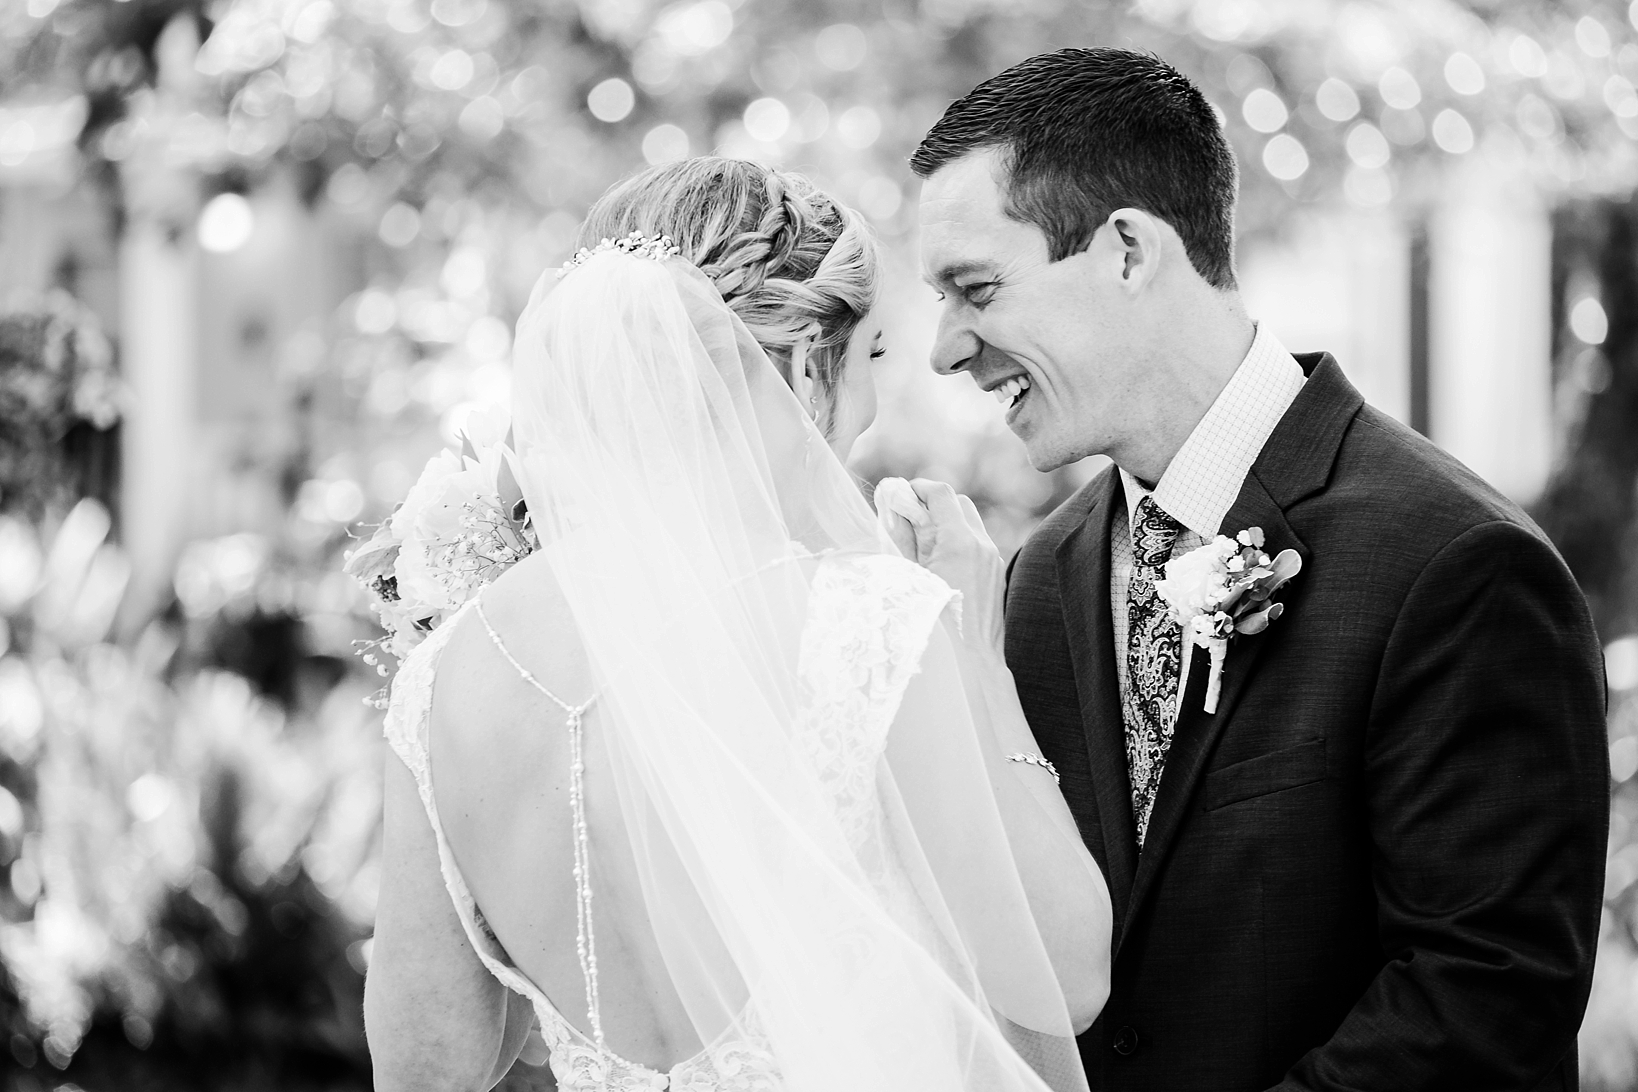 Bride and Groom share a genuine moment of joy before the big day at Cross Creek Ranch